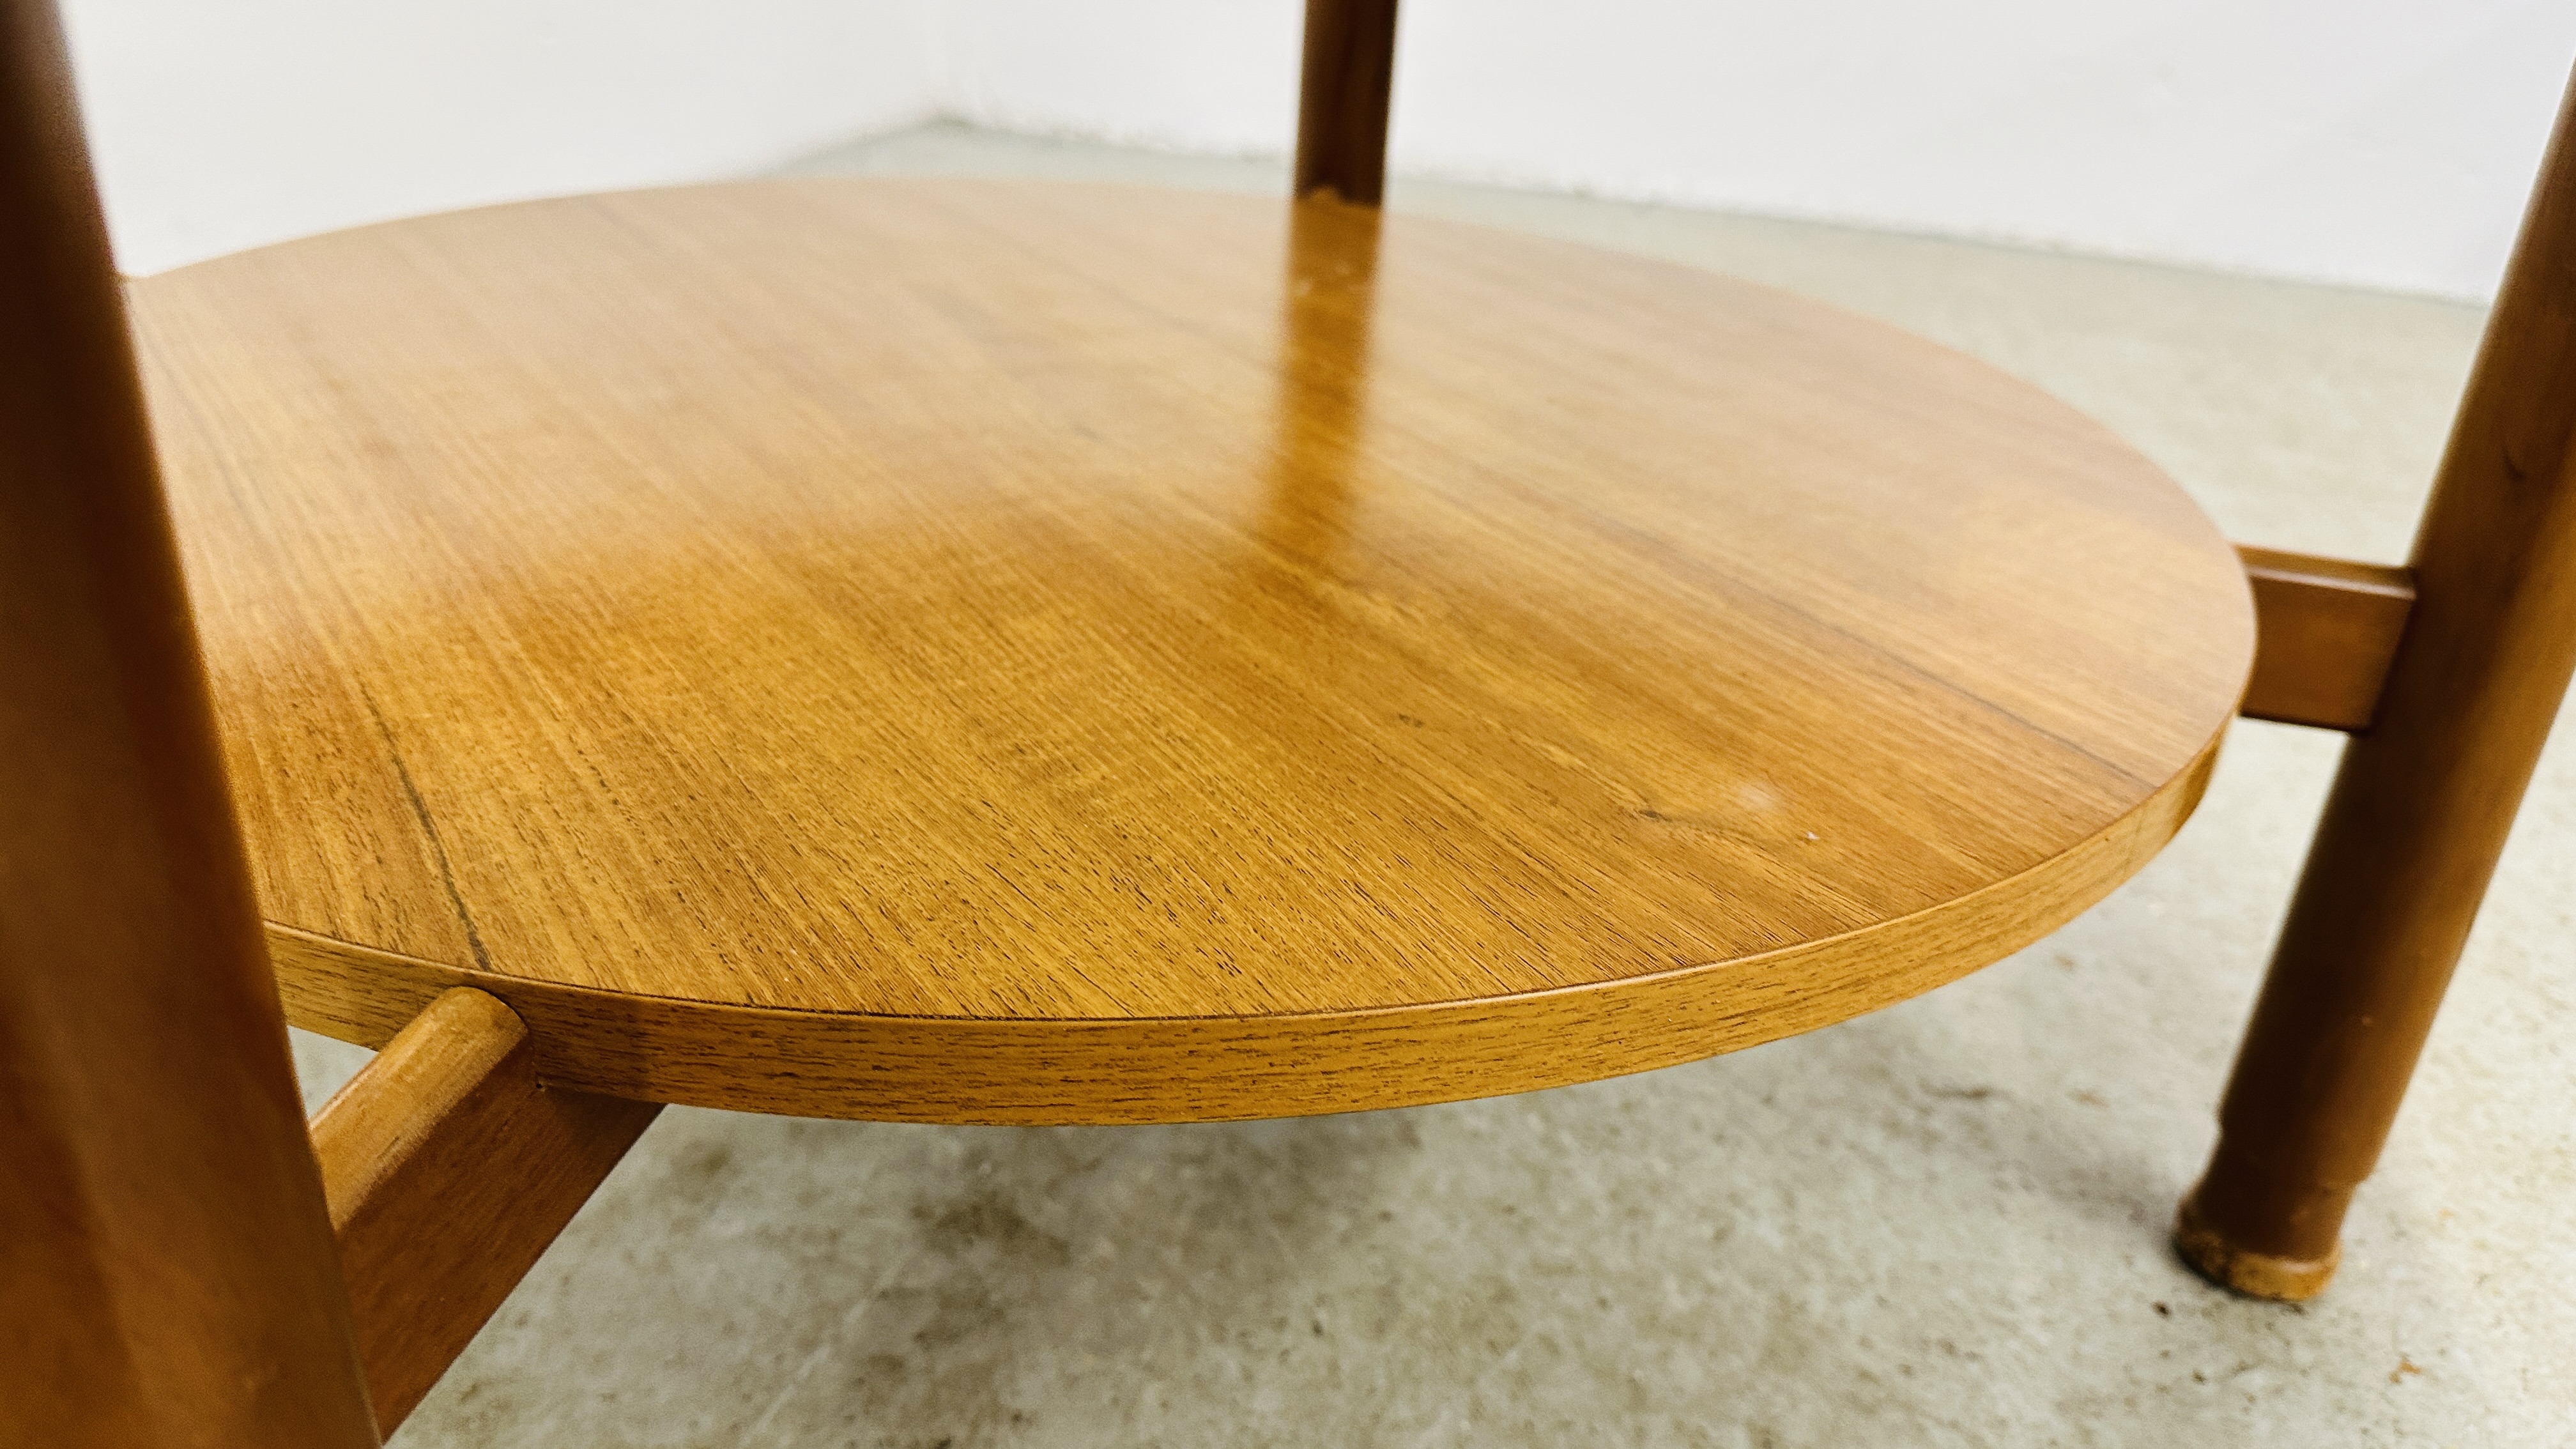 A RETRO CIRCULAR TEAK FINISH COFFEE TABLE WITH GLASS INSET TOP. - Image 6 of 6